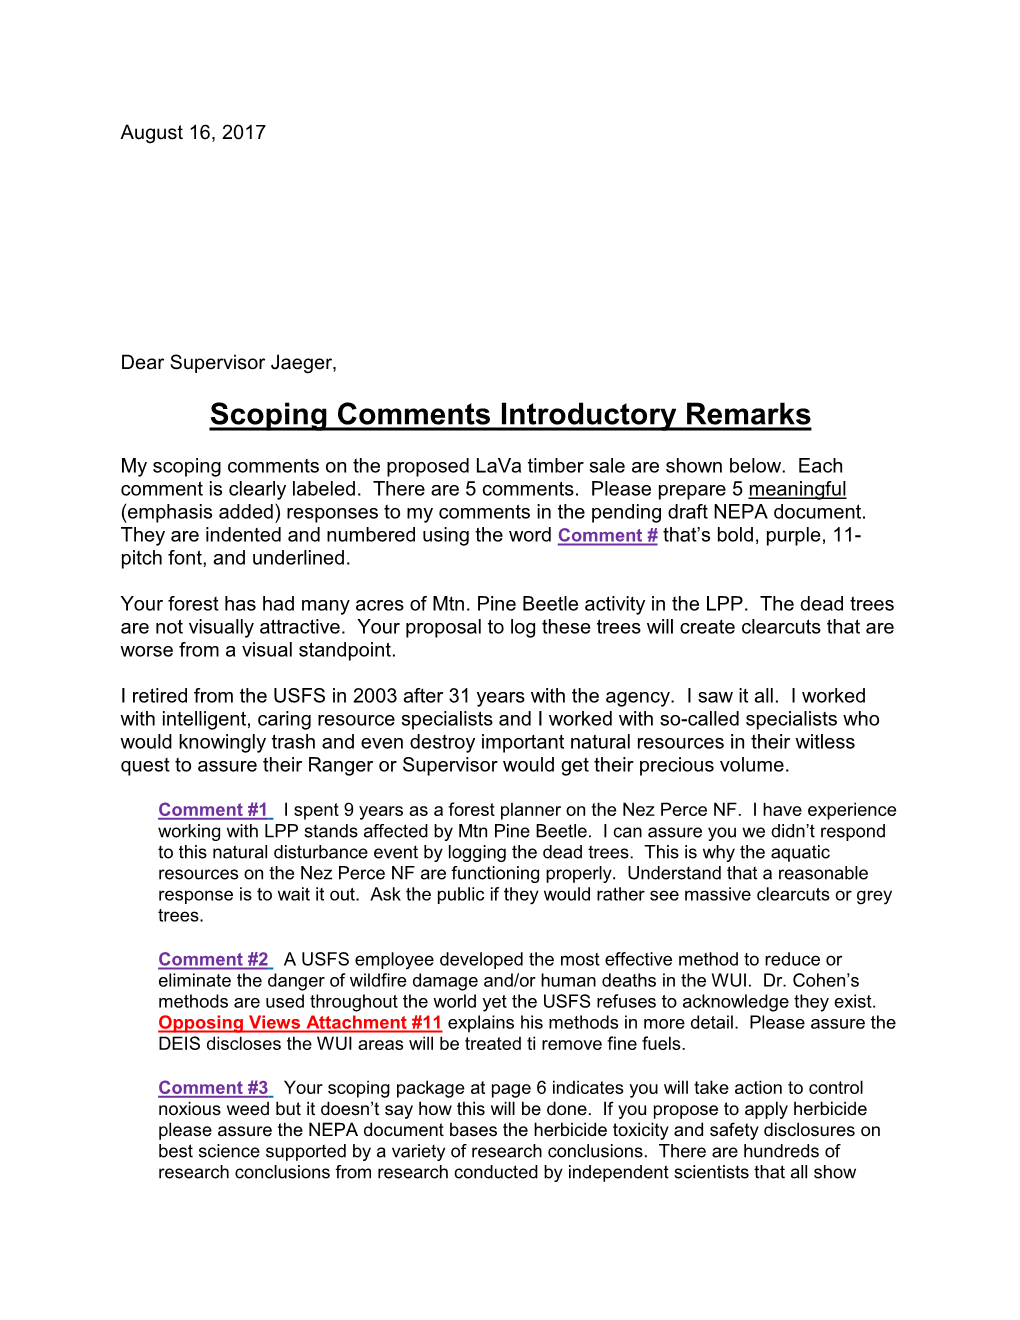 Scoping Comments Introductory Remarks